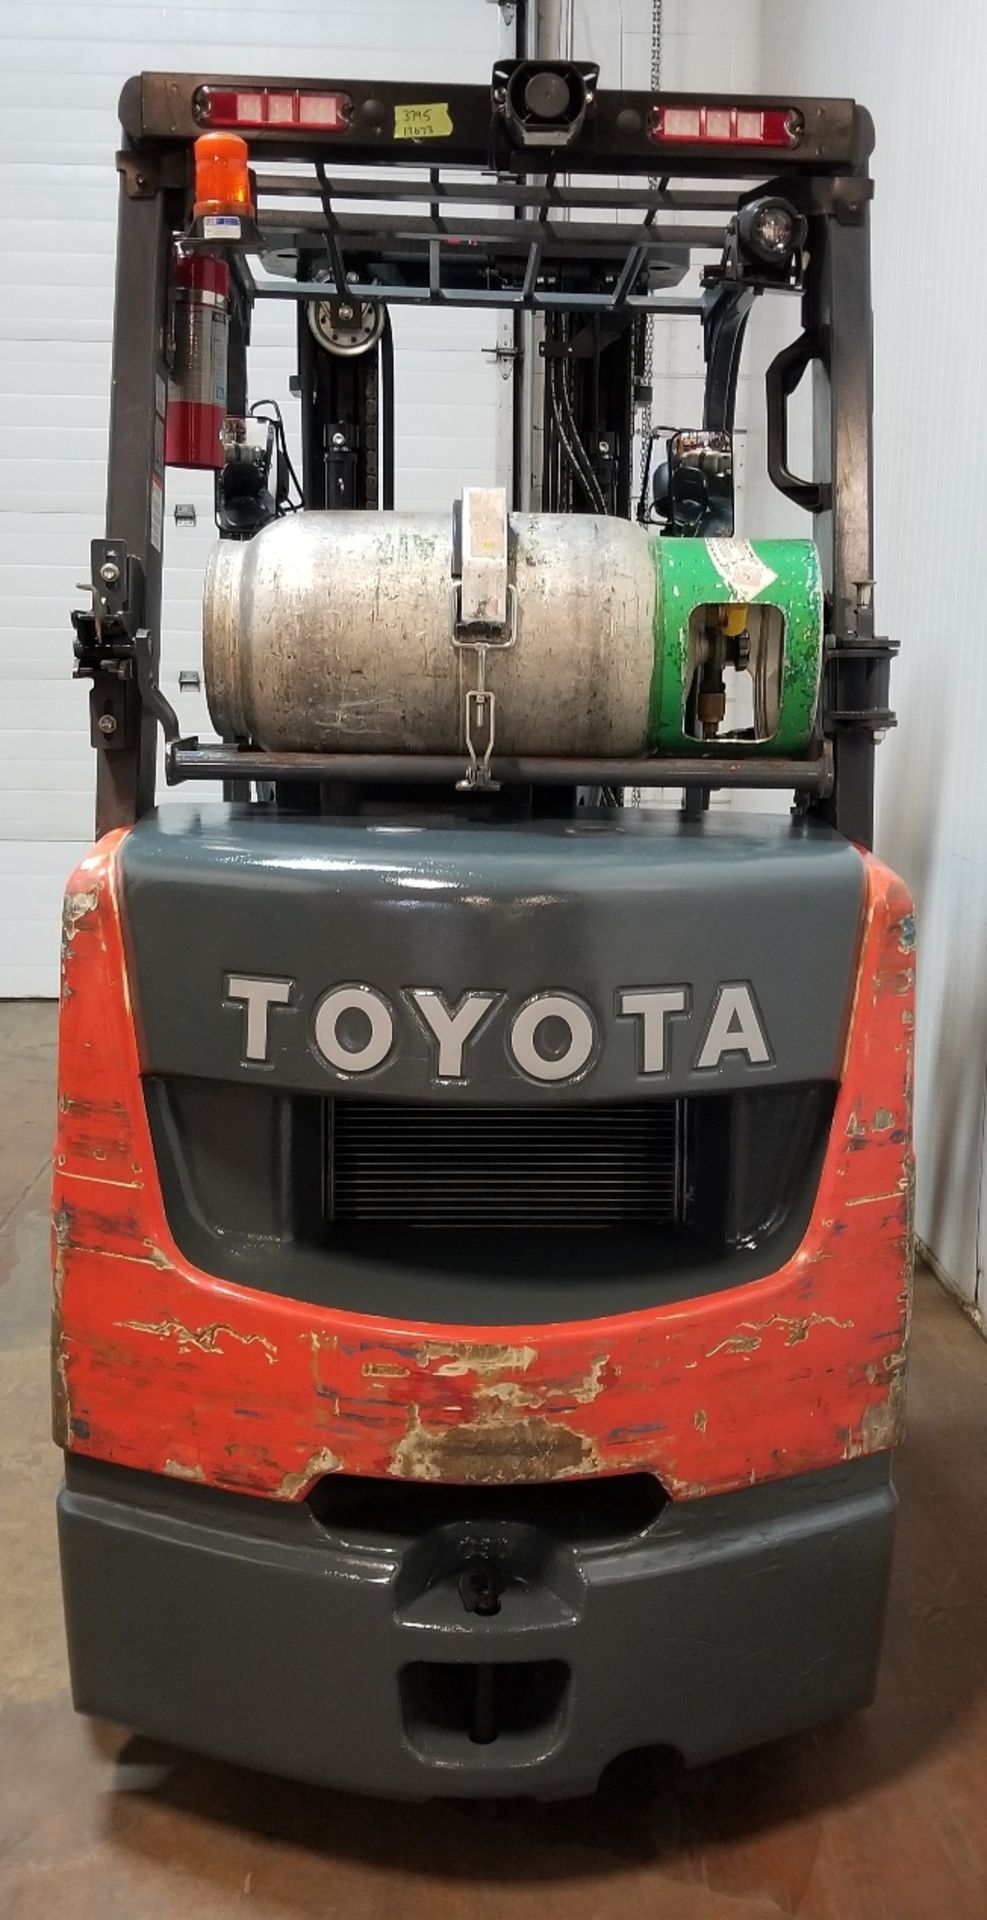 TOYOTA (2015) 8FGCU30 6,000 LB. CAPACITY LPG FORKLIFT WITH 187" MAX. LIFT HEIGHT, 3-STAGE MAST, SIDE - Image 4 of 4